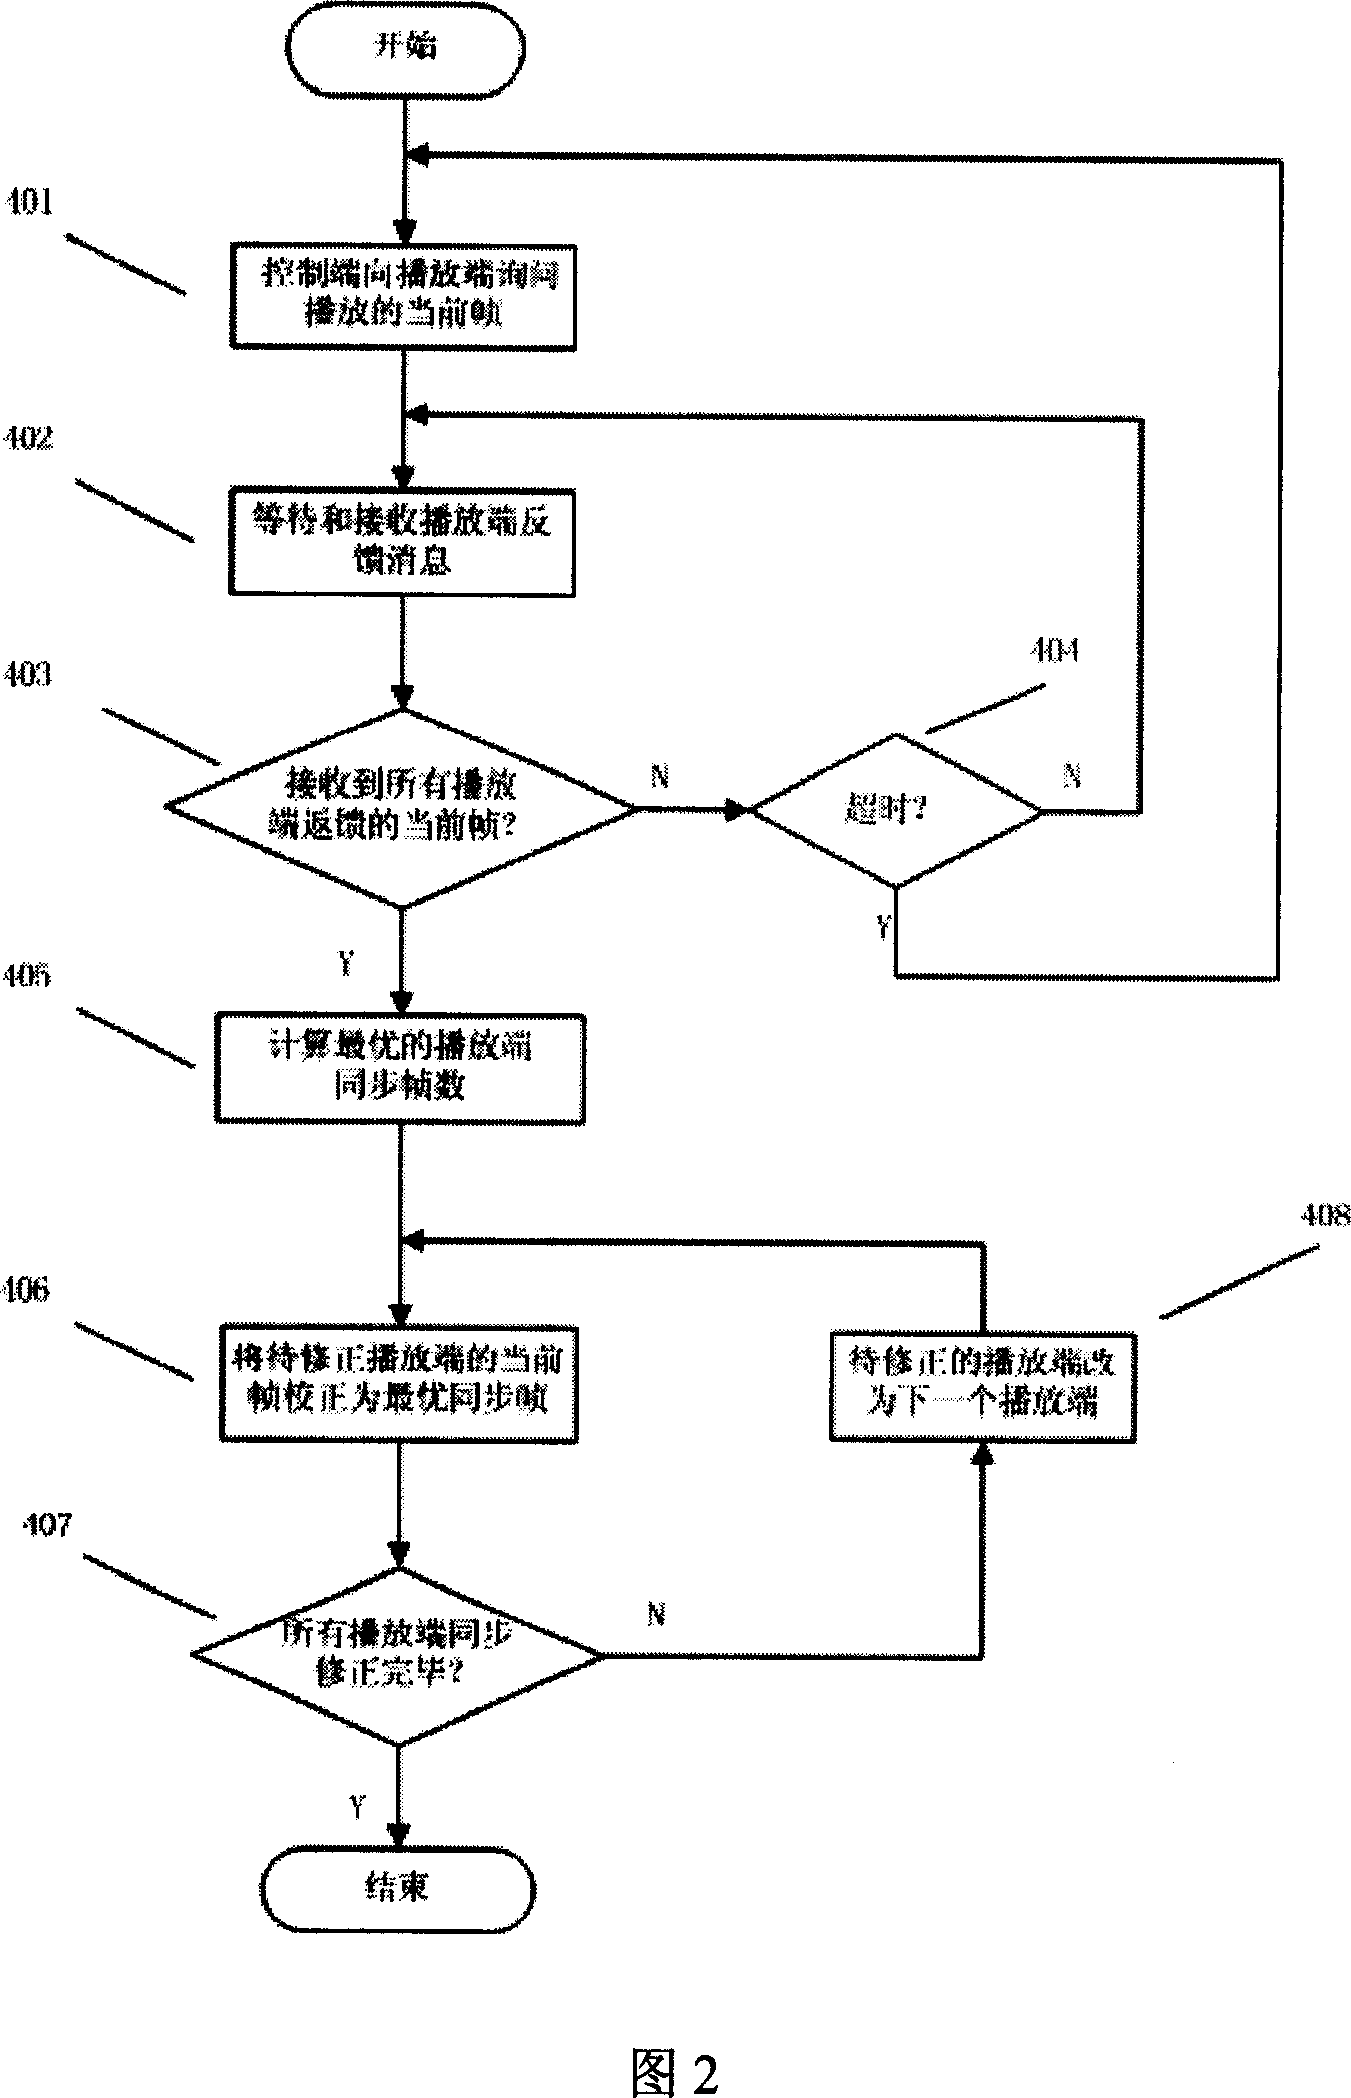 Control method for synchronization of multiscreen playing suitable for irregular screen